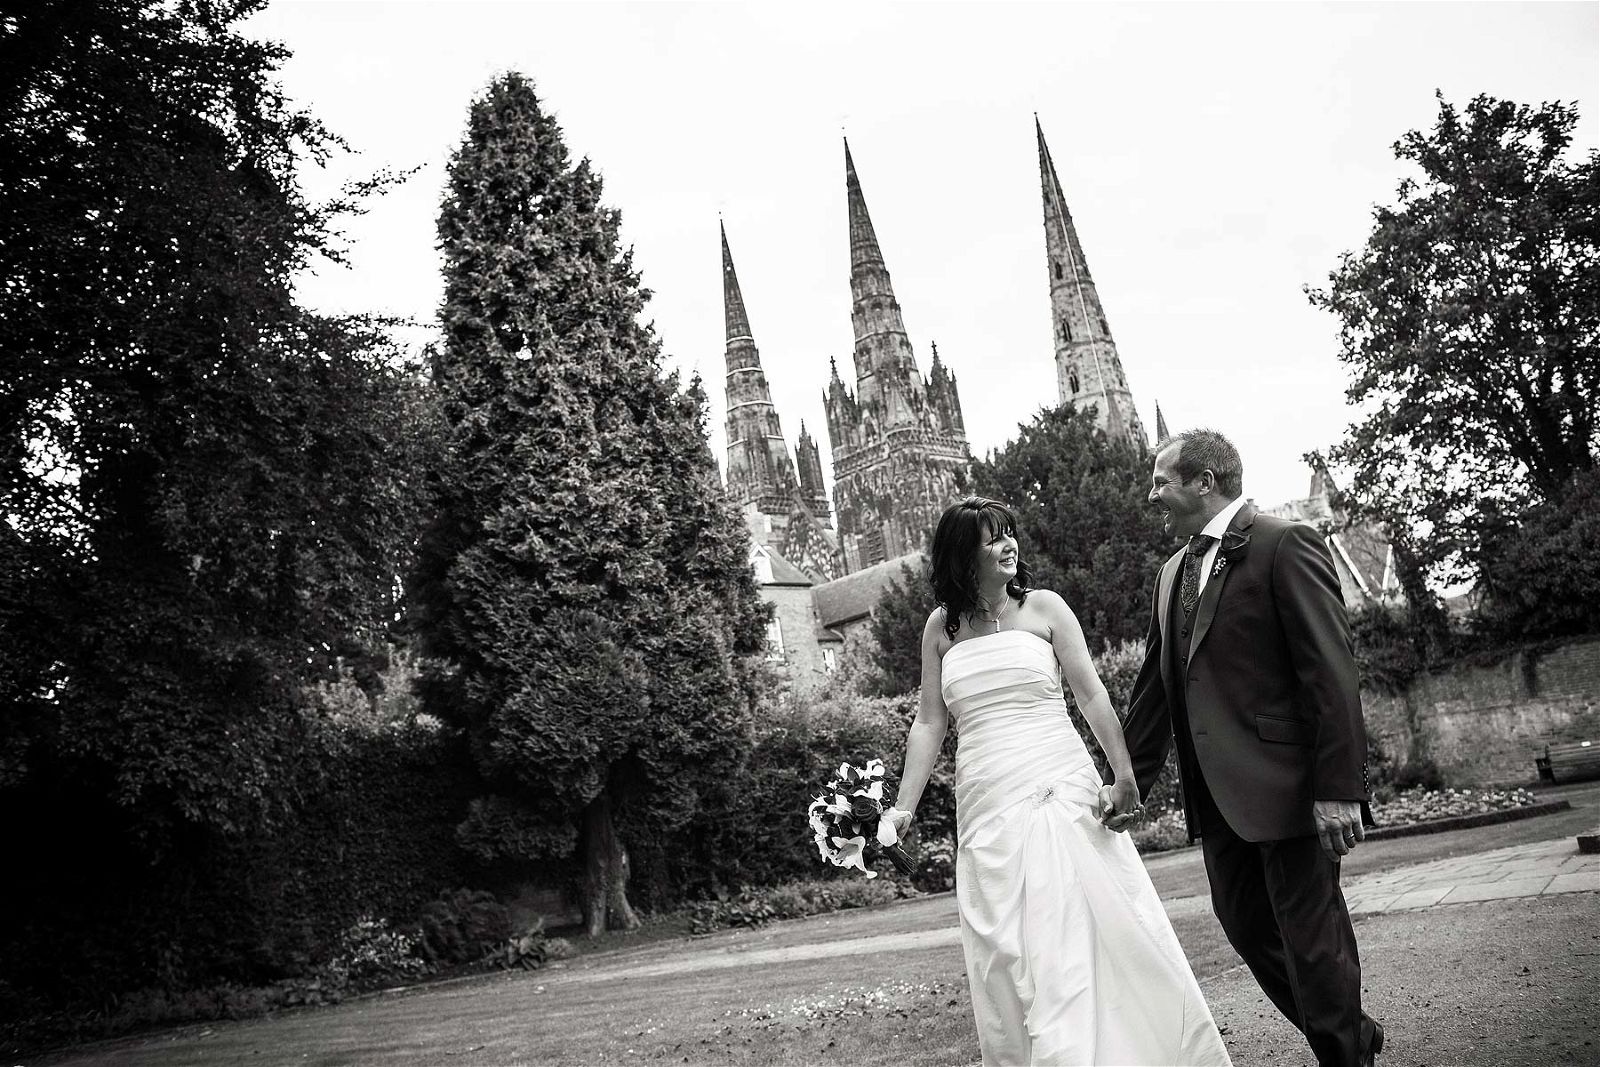 Creative modern wedding photography portraits in Lichfield City Centre in Staffordshire by Documentary Wedding Photographer Stuart James